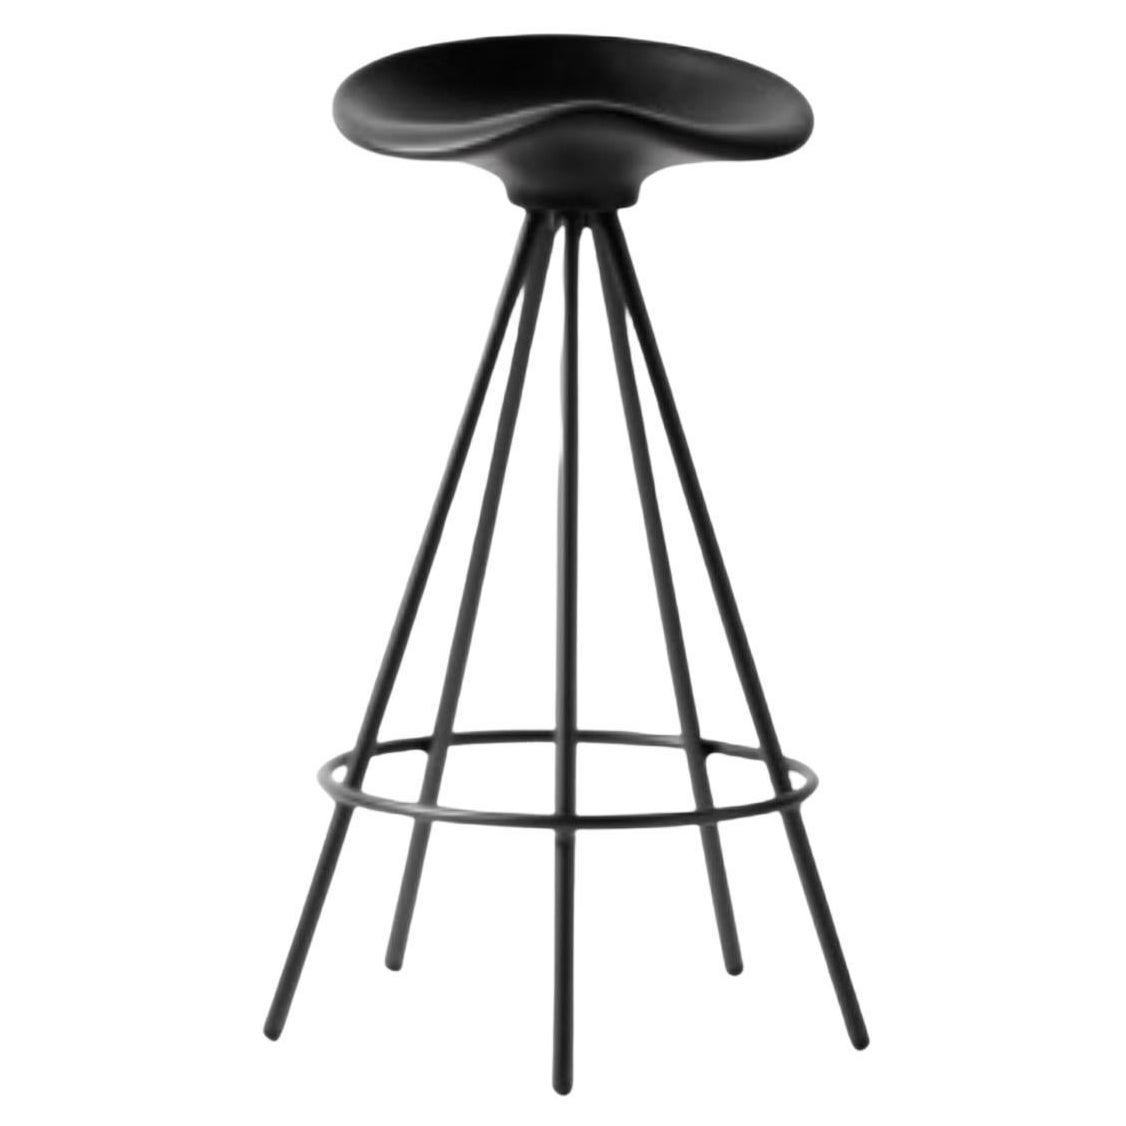 Jamaica All Black Stool by Pepe Cortes